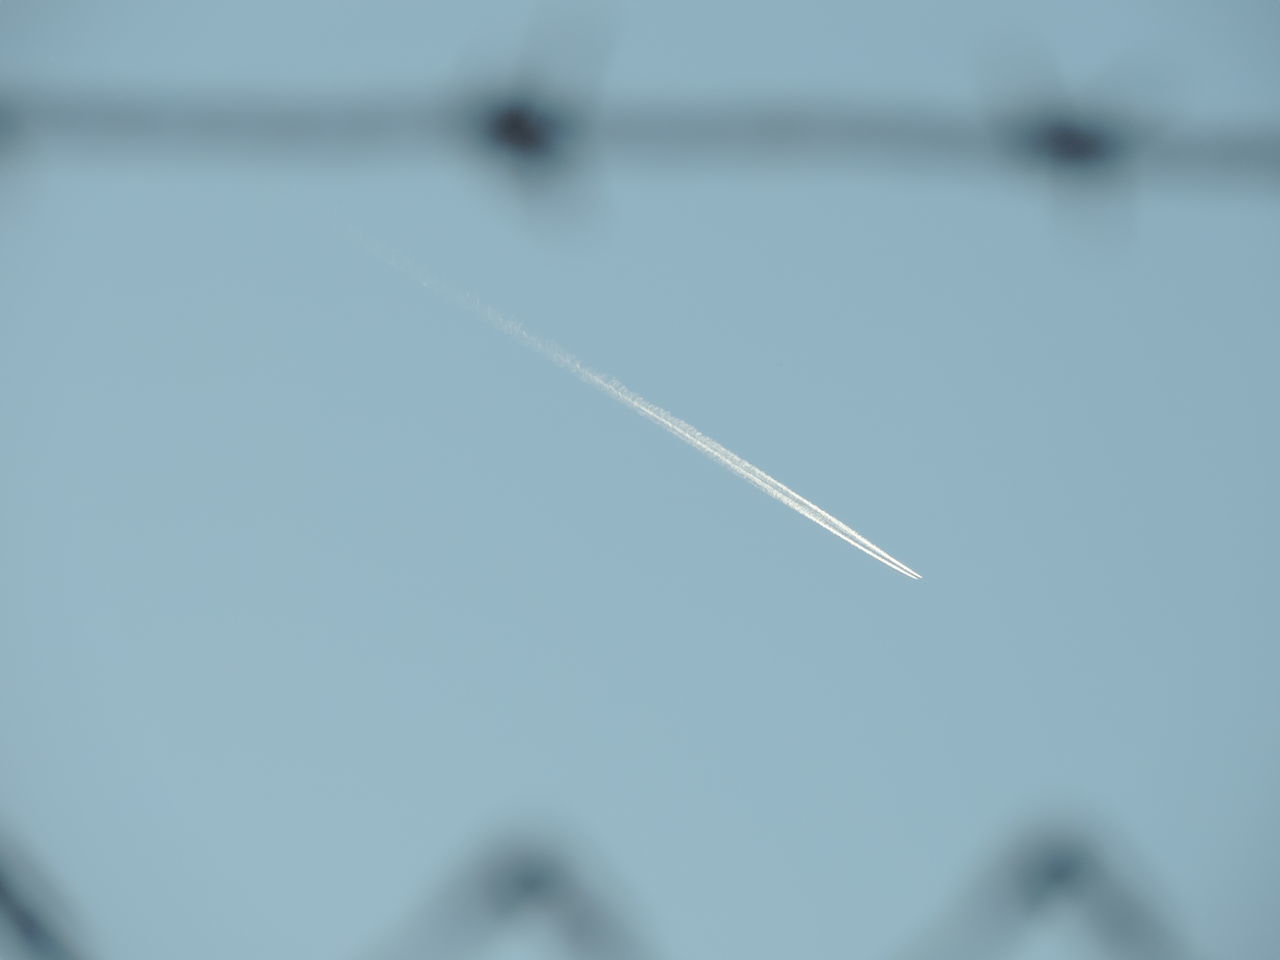 CLOSE-UP OF AIRPLANE AGAINST CLEAR SKY